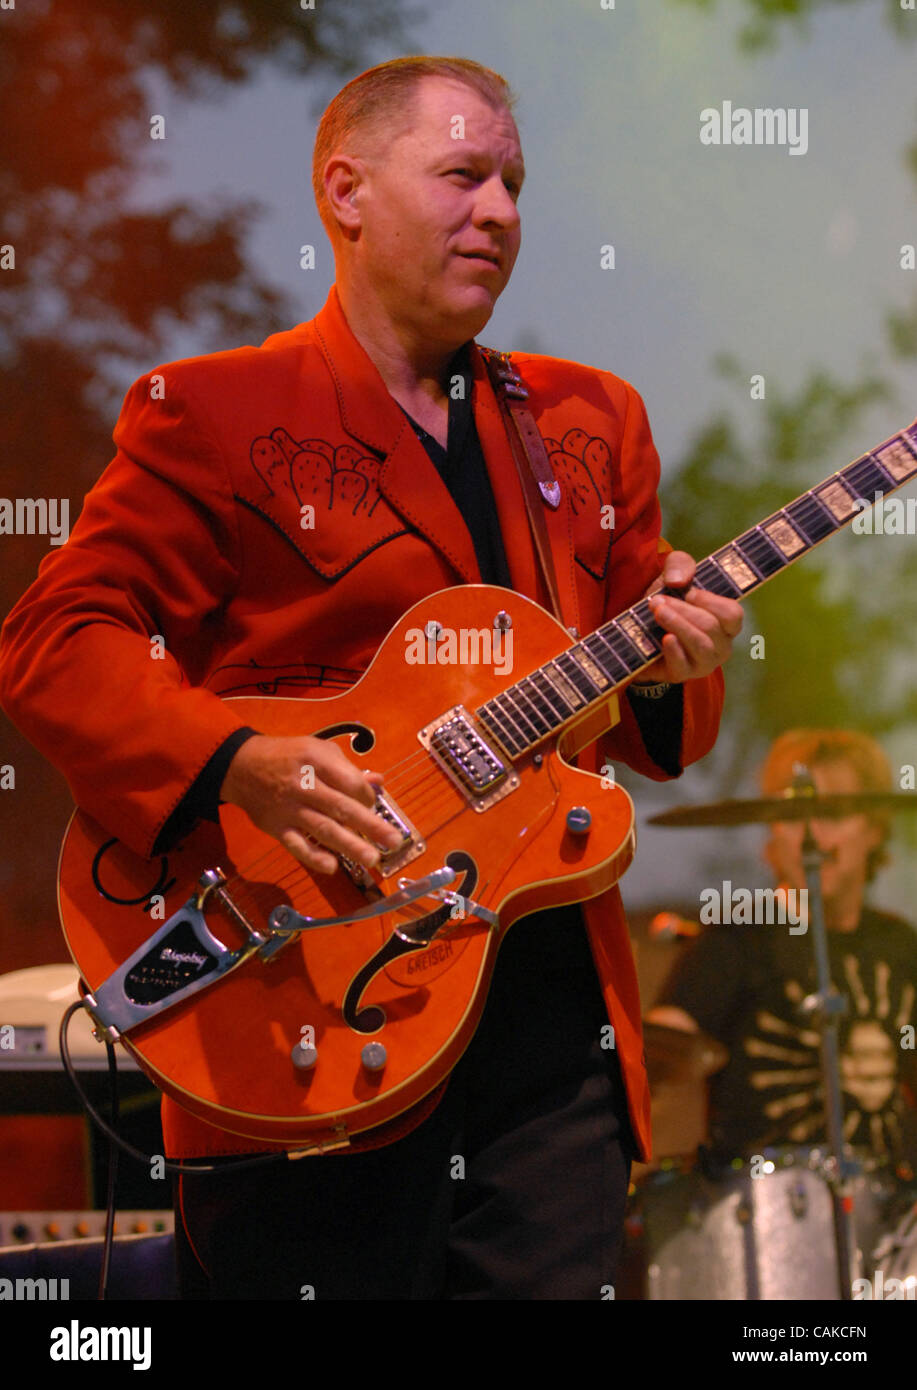 Sep. 14, 2007 Austin, TX; USA, Guitarist JIM " REVEREND HORTON" HEATH performs with with Reverend Horton Heat as they perform live as part of the Austin City Limits Music Festival that took place at Zilker Park located in Austin.  The three day festival attracted over 60,000 fans a day. Copyright 20 Stock Photo